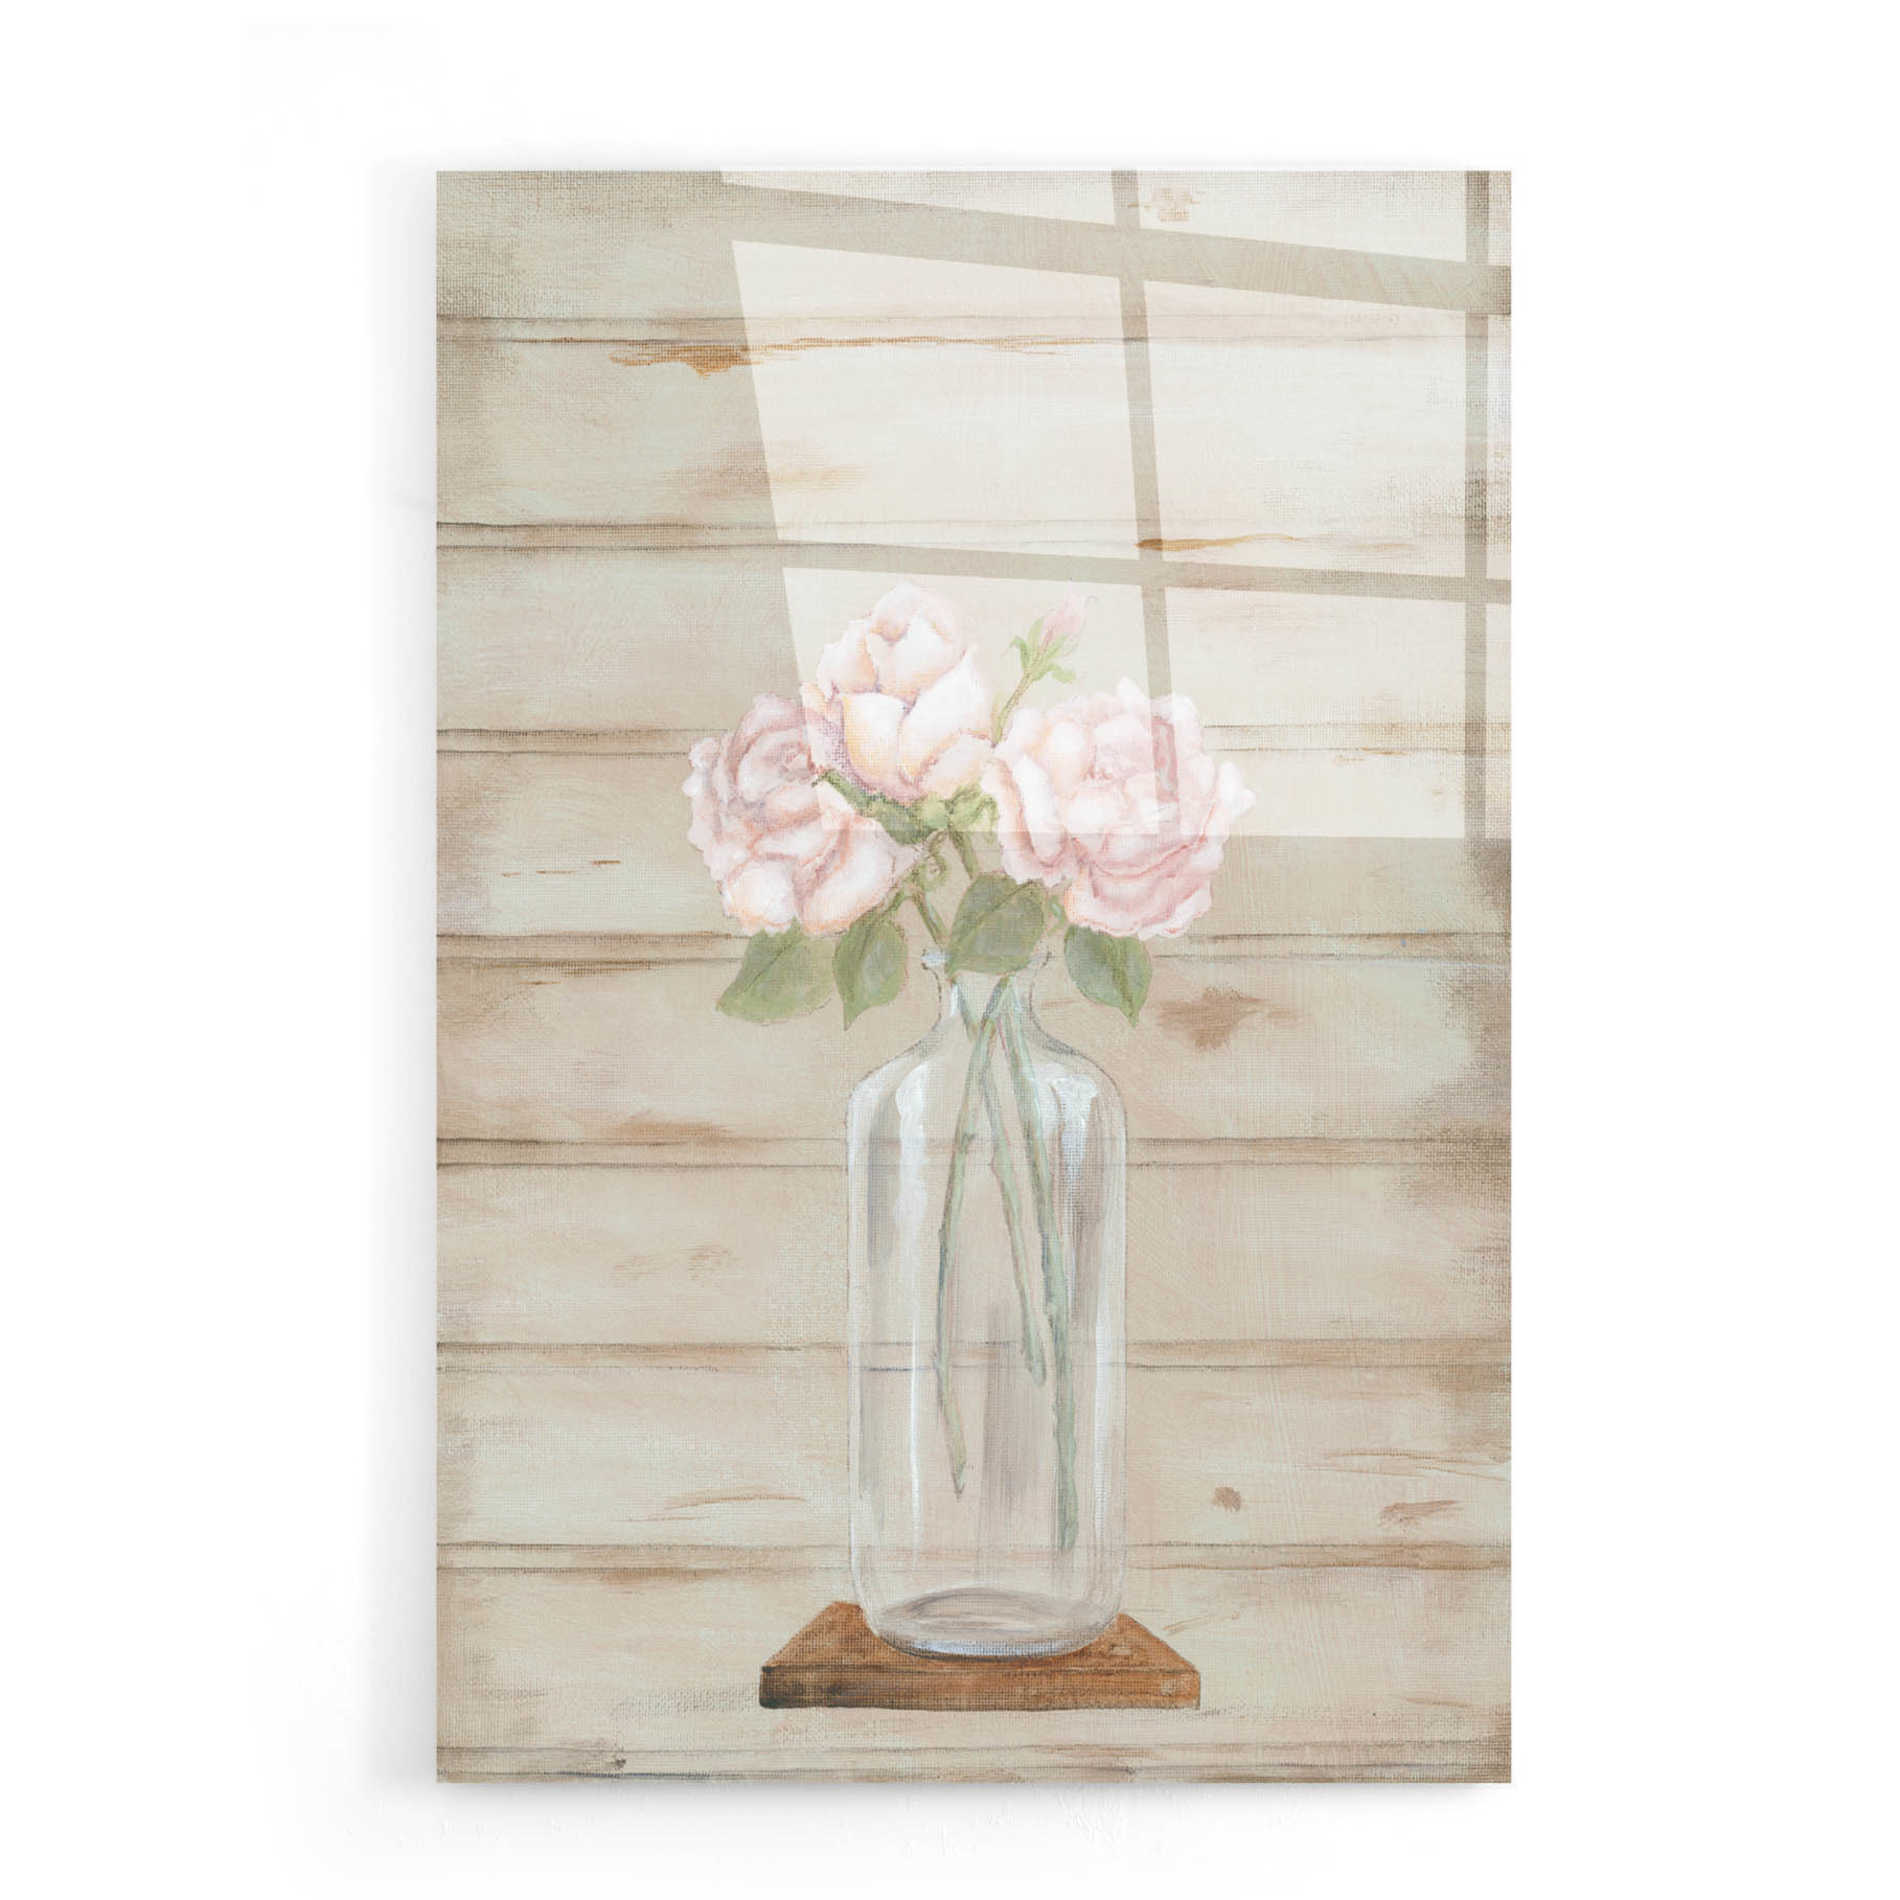 Epic Art 'Roses in Glass Vase' by Pam Britton, Acrylic Glass Wall Art,16x24